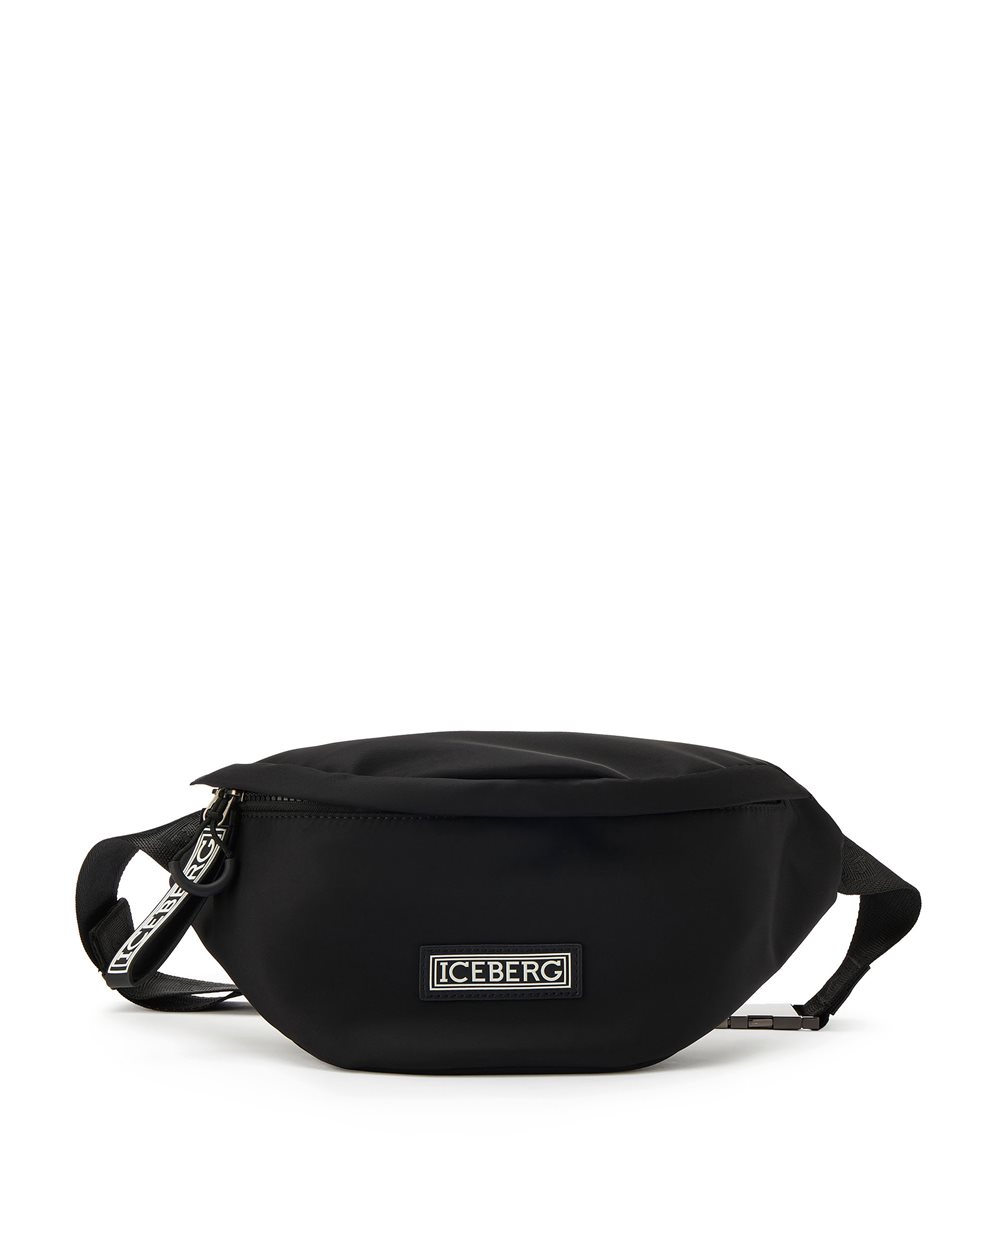 Nylon pouch with logo - Accessories | Iceberg - Official Website